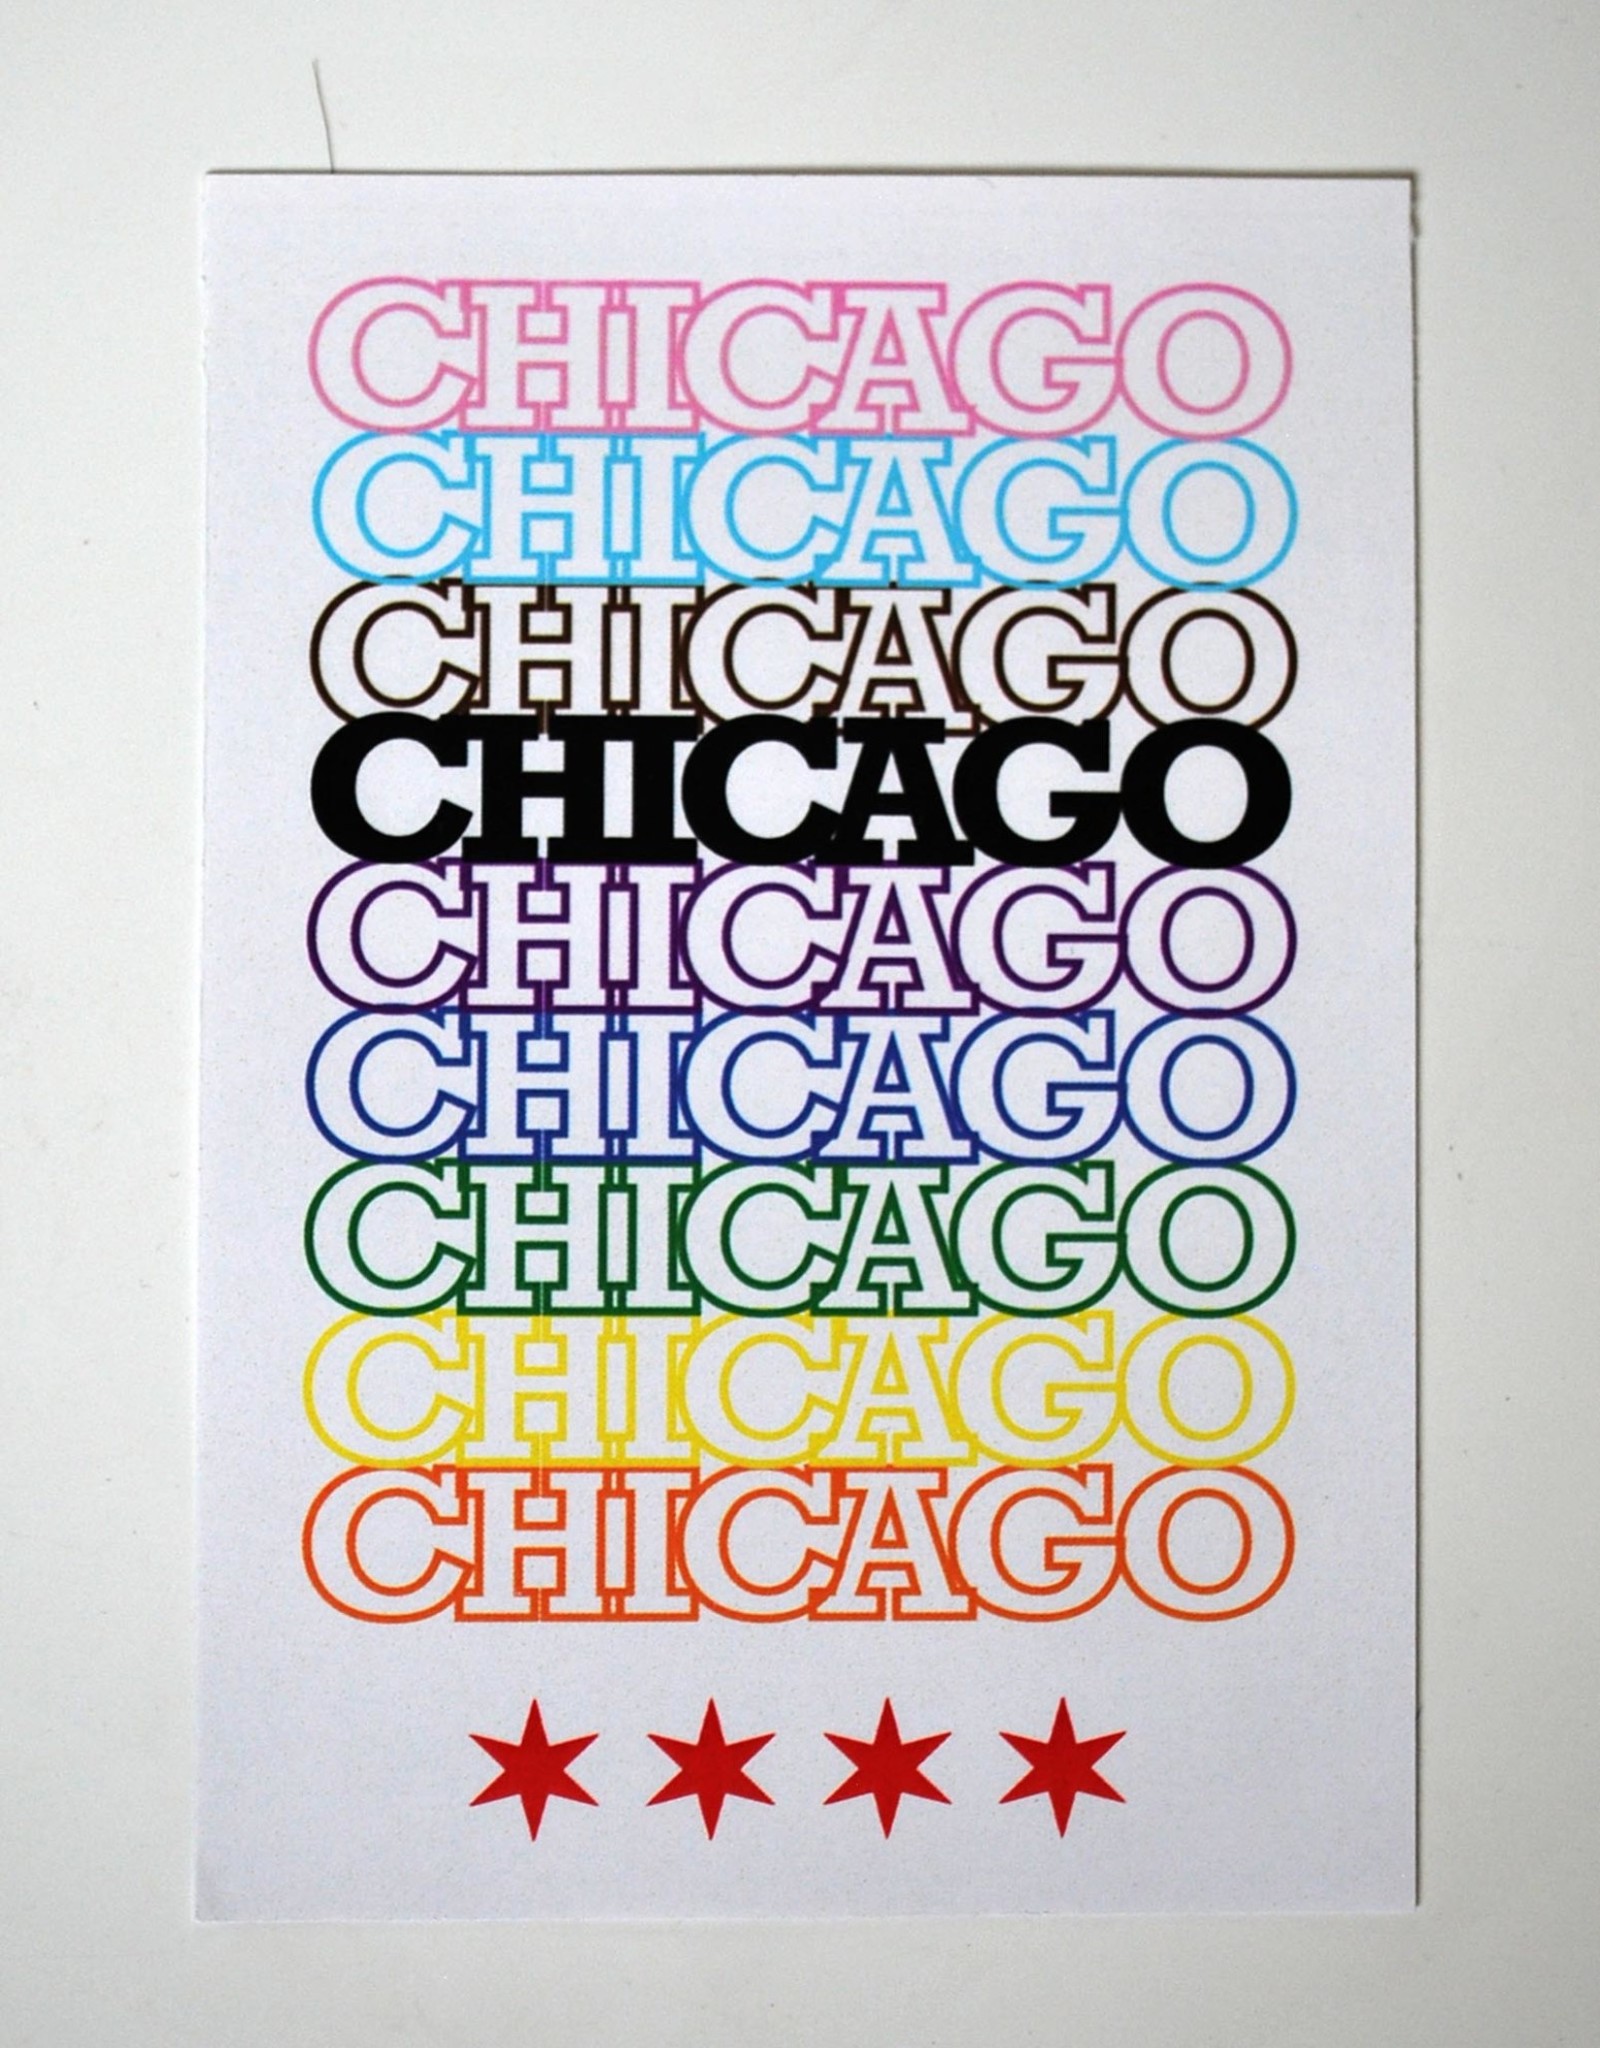 Knight Illustrations Corvus Press: Chicago Peace Recyclable Sticker by David Knight